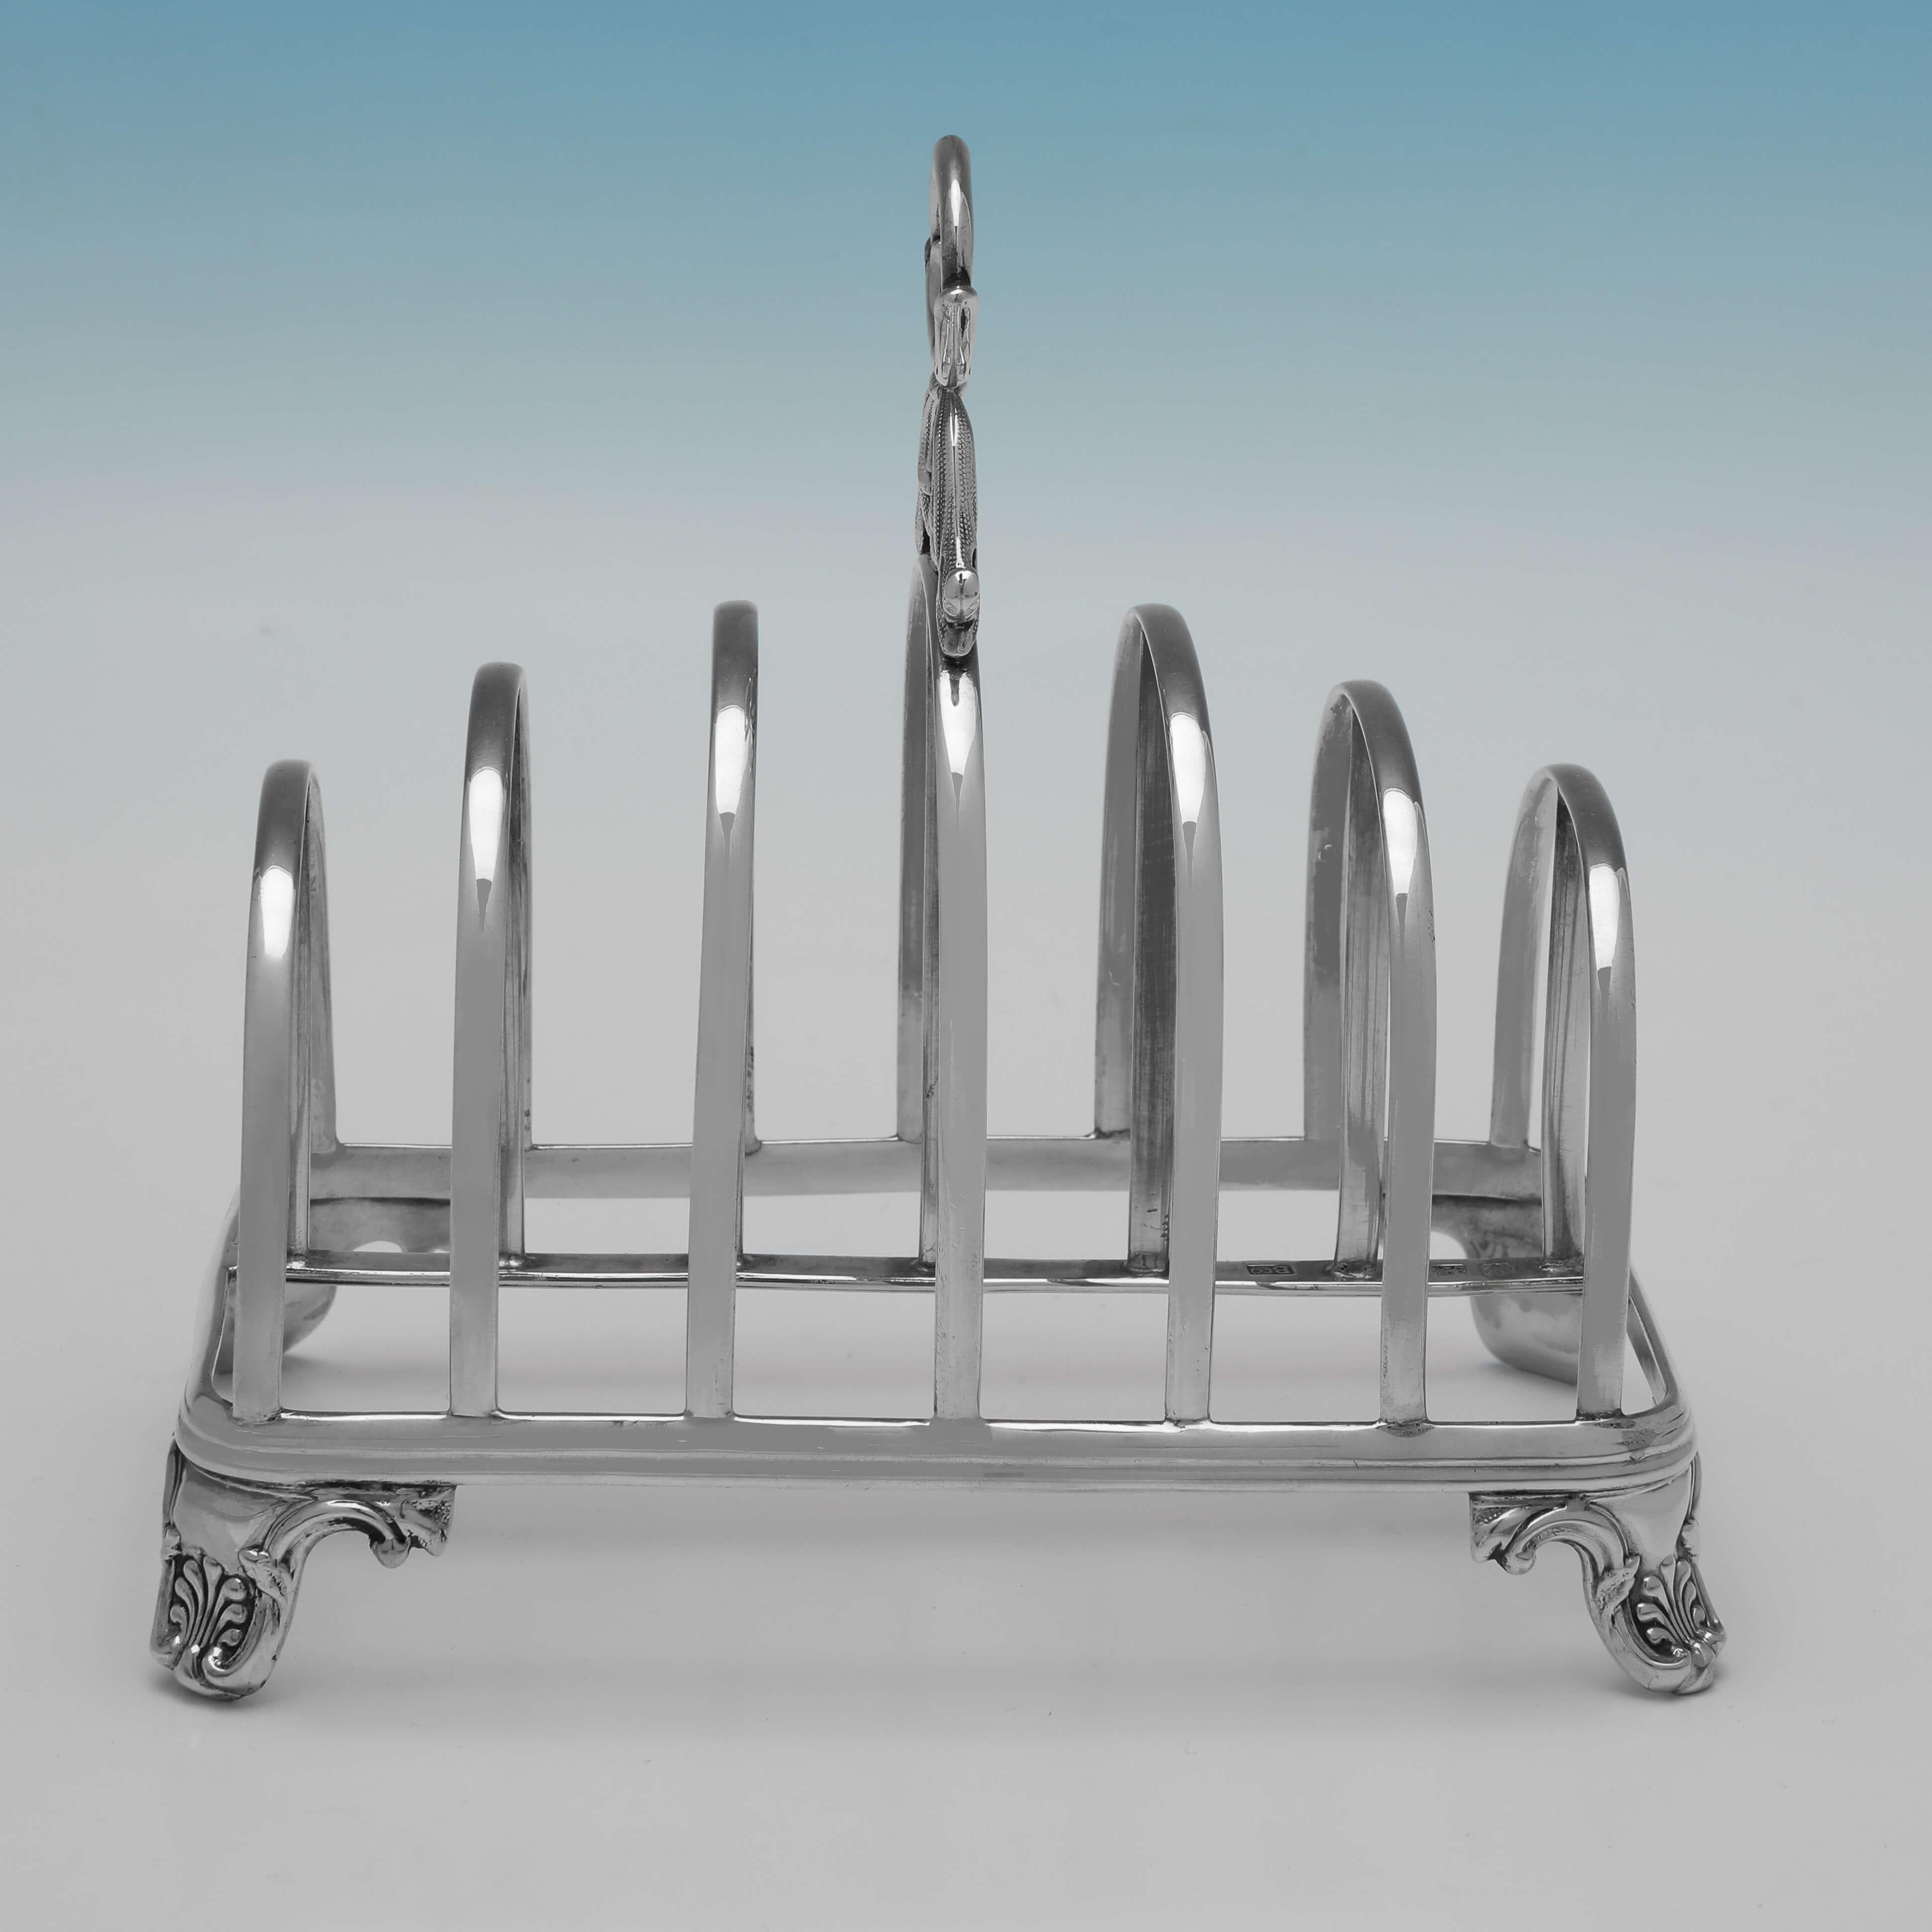 Hallmarked in sheffield in 1845 by Henry Wilkinson & Co., this handsome, Victorian, antique sterling silver toast rack, will hold 6 pieces of toast, and features shell and scroll feet, and acanthus detailing to the handle. 

The toast rack